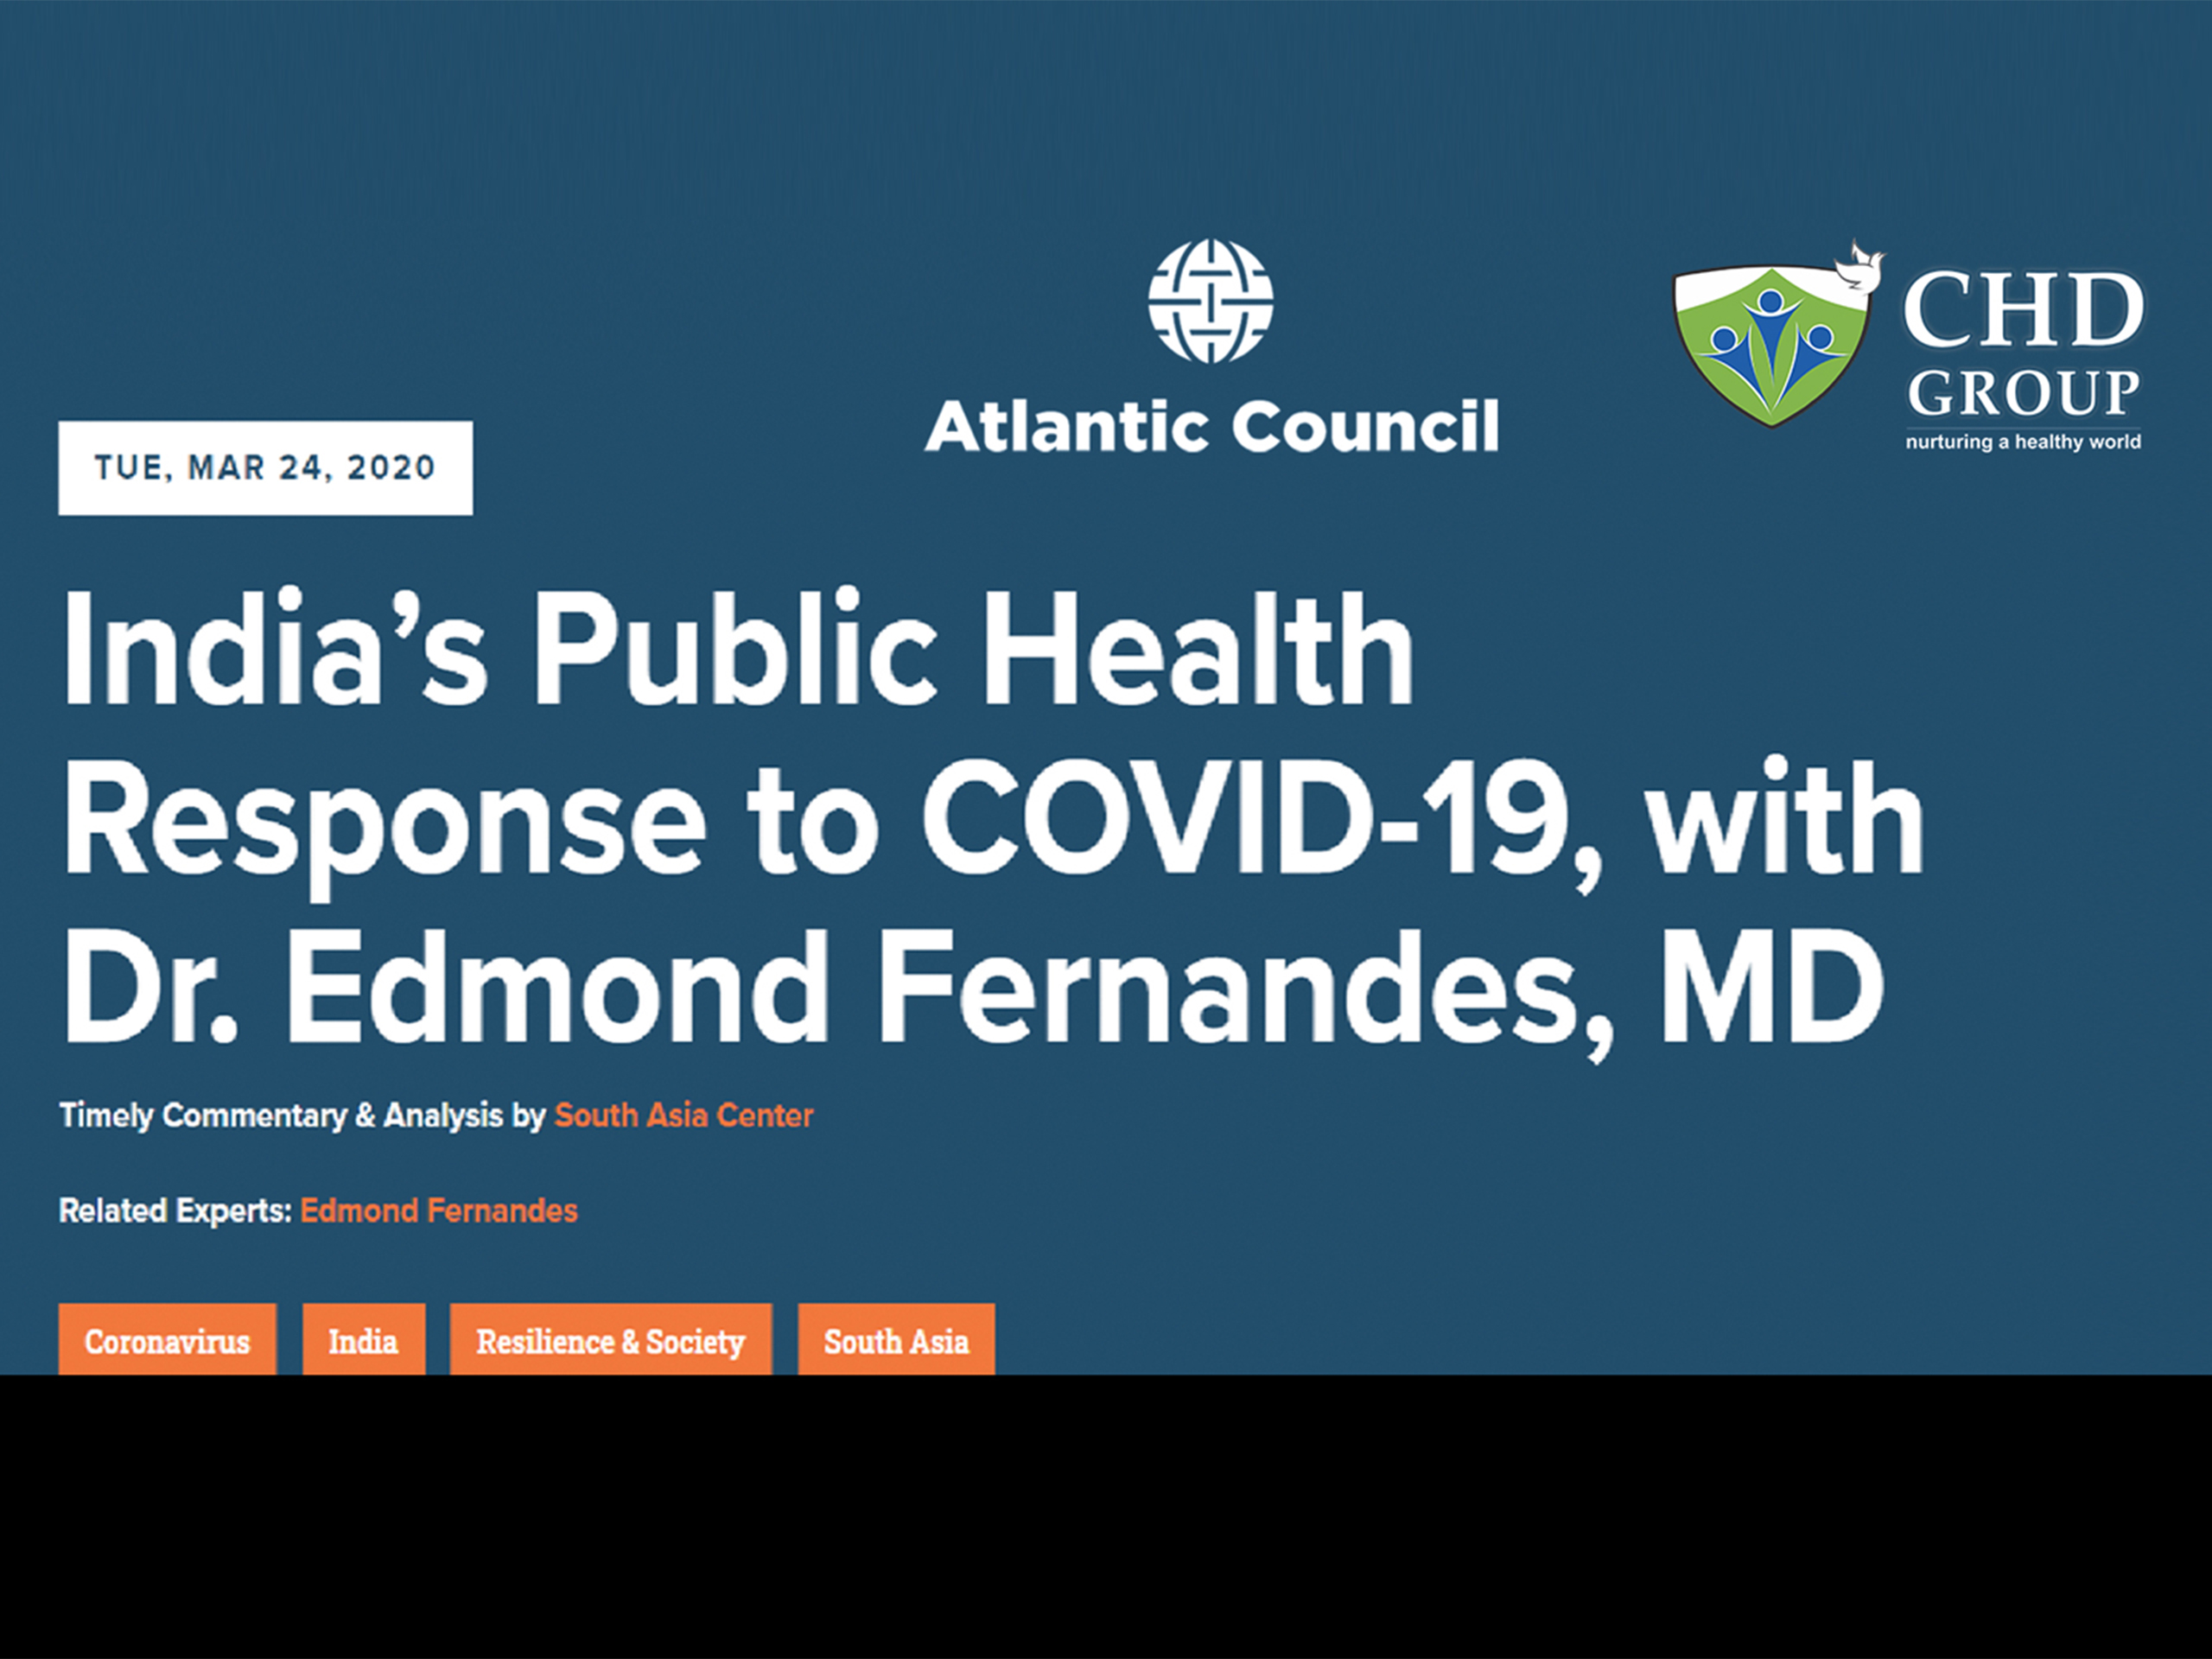 India’s public health response to COVID-19 with Dr. Edmond Fernandes, MD